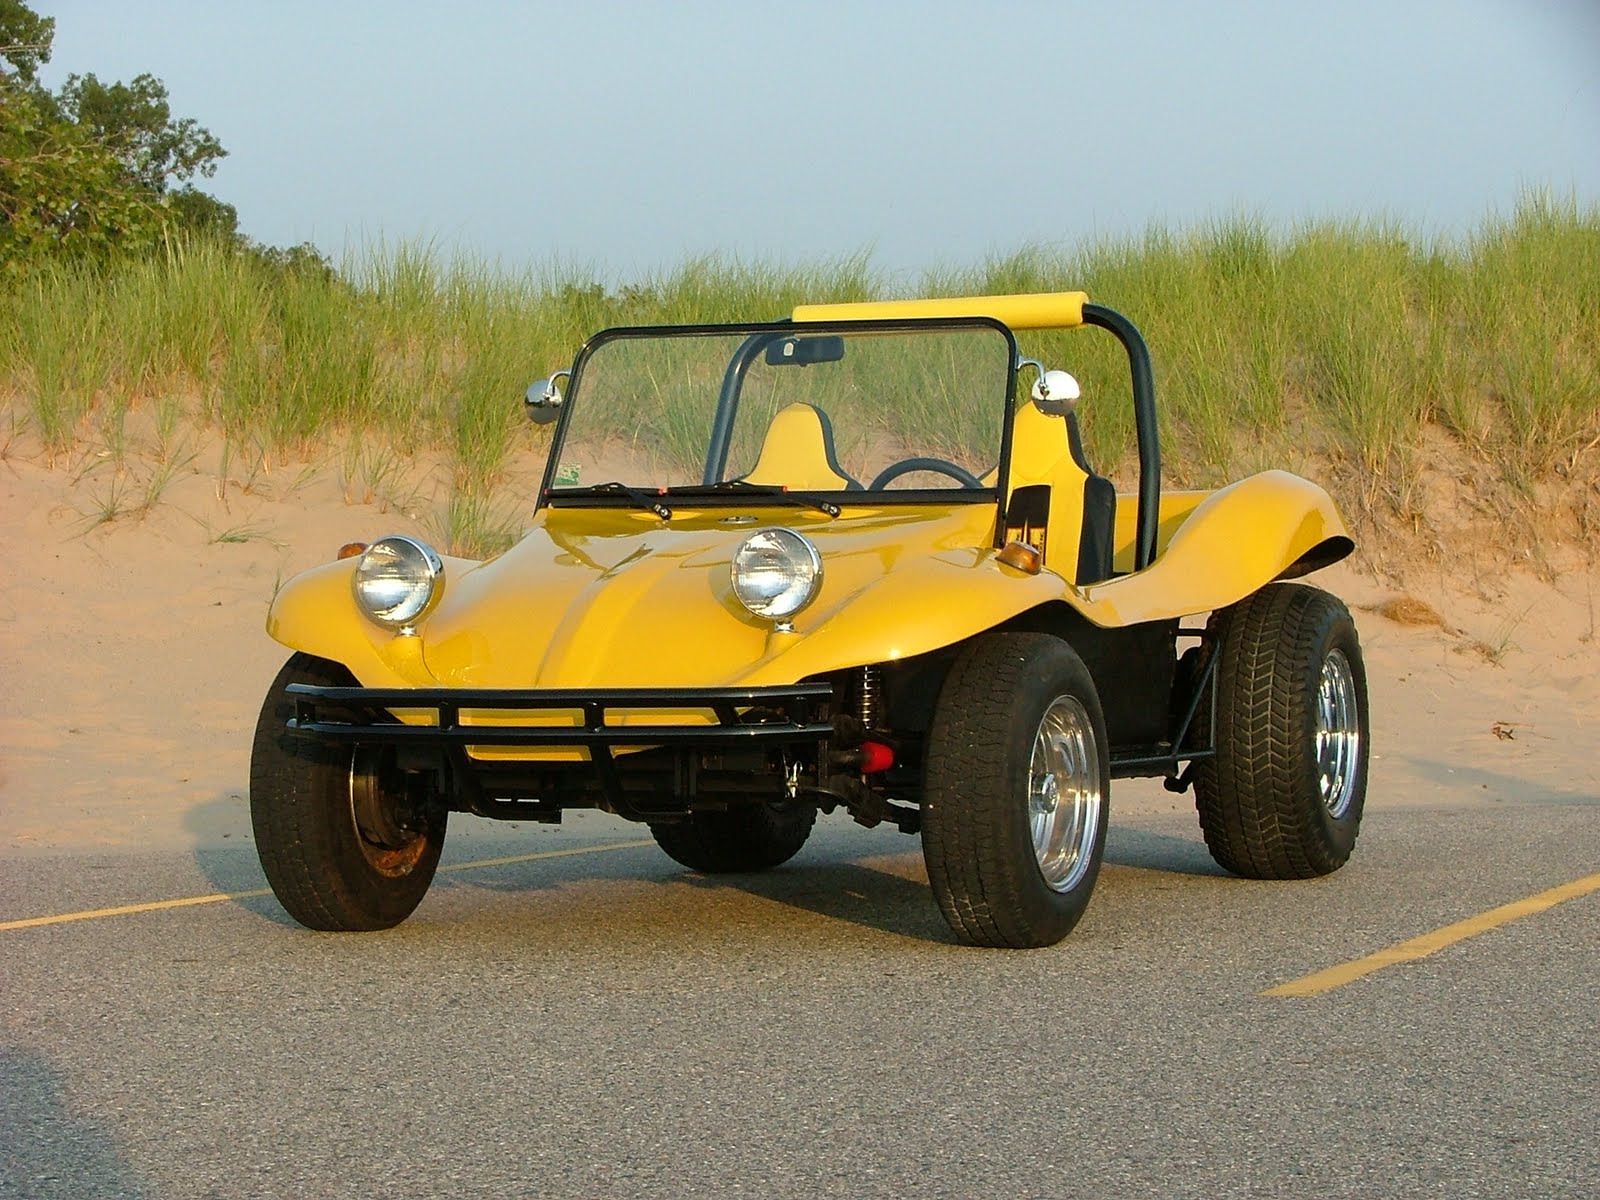 We aim to provide a variety of quality vw beetle parts, dune buggy parts an...